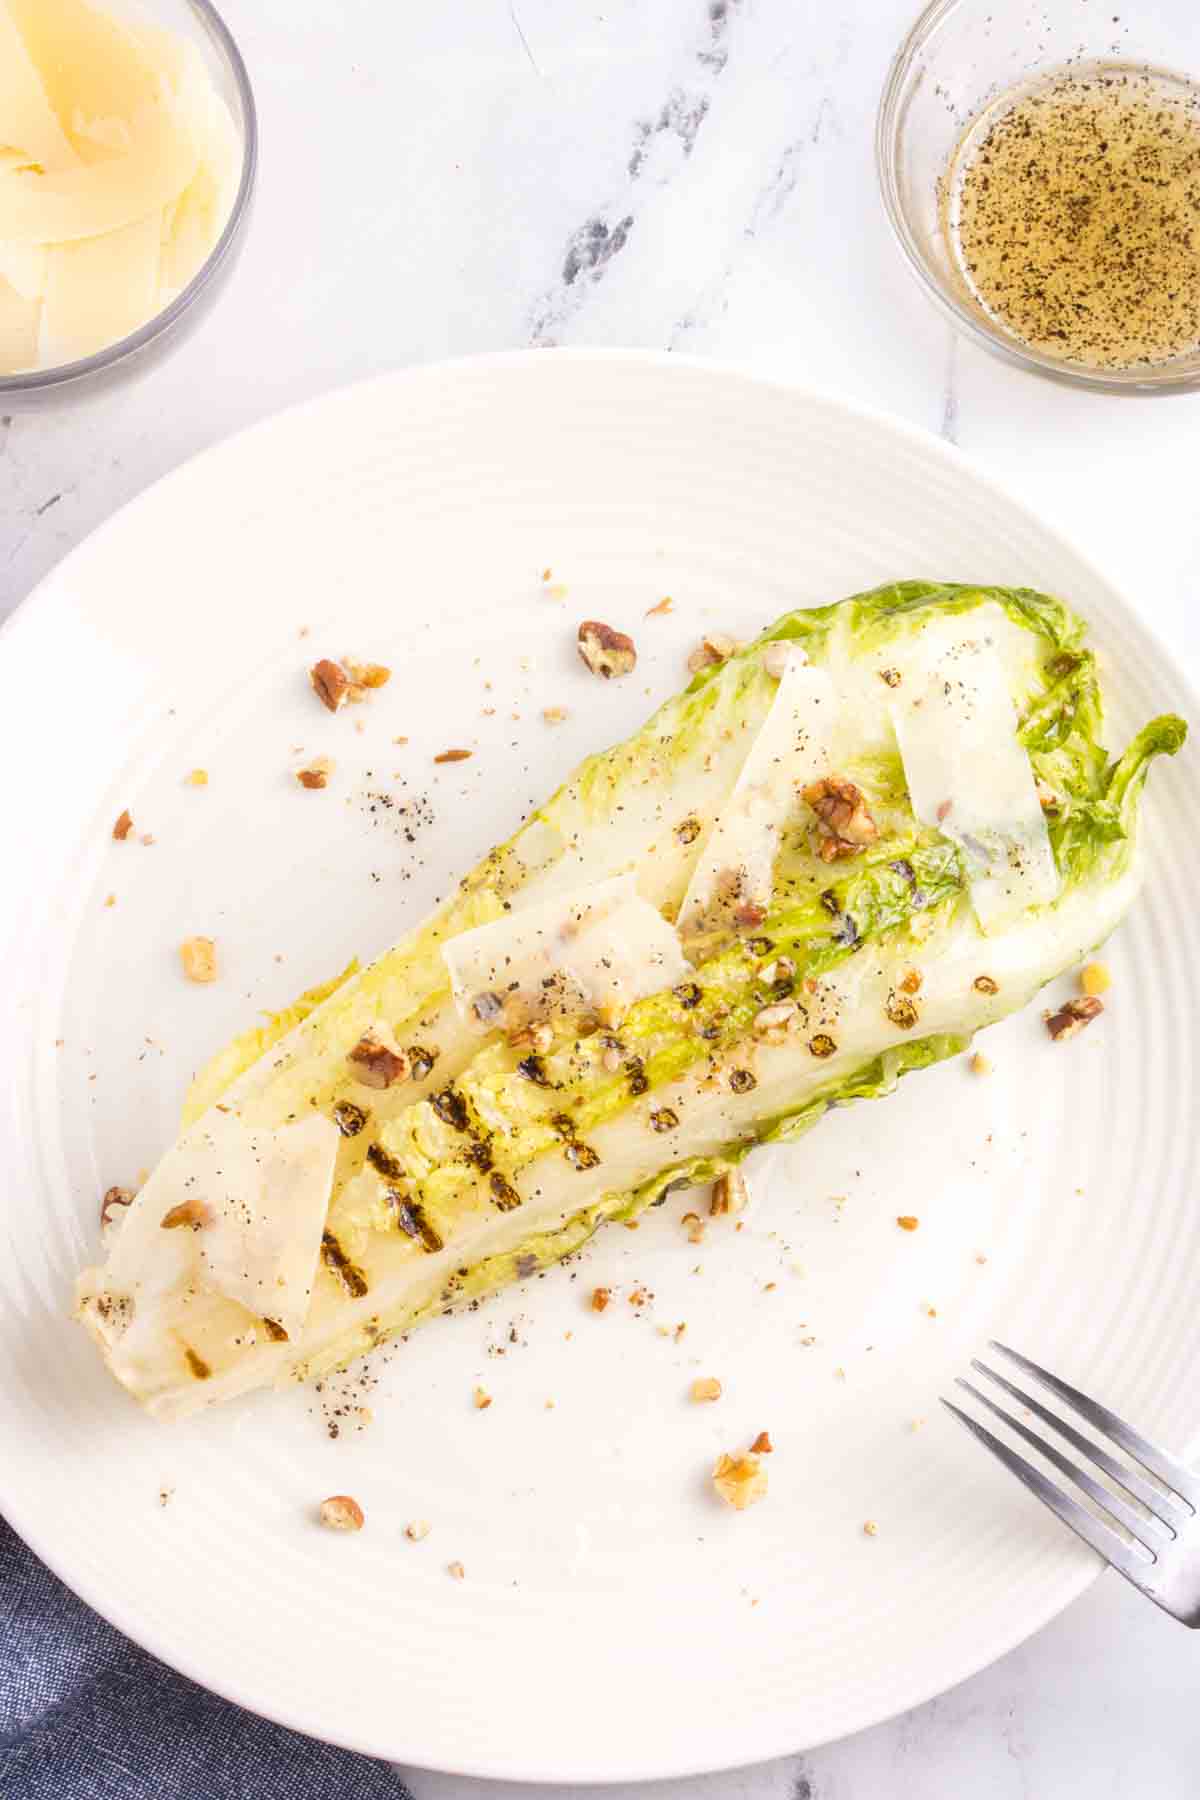 grilled romaine heart with Parmesan slivers and walnuts on plate with fork